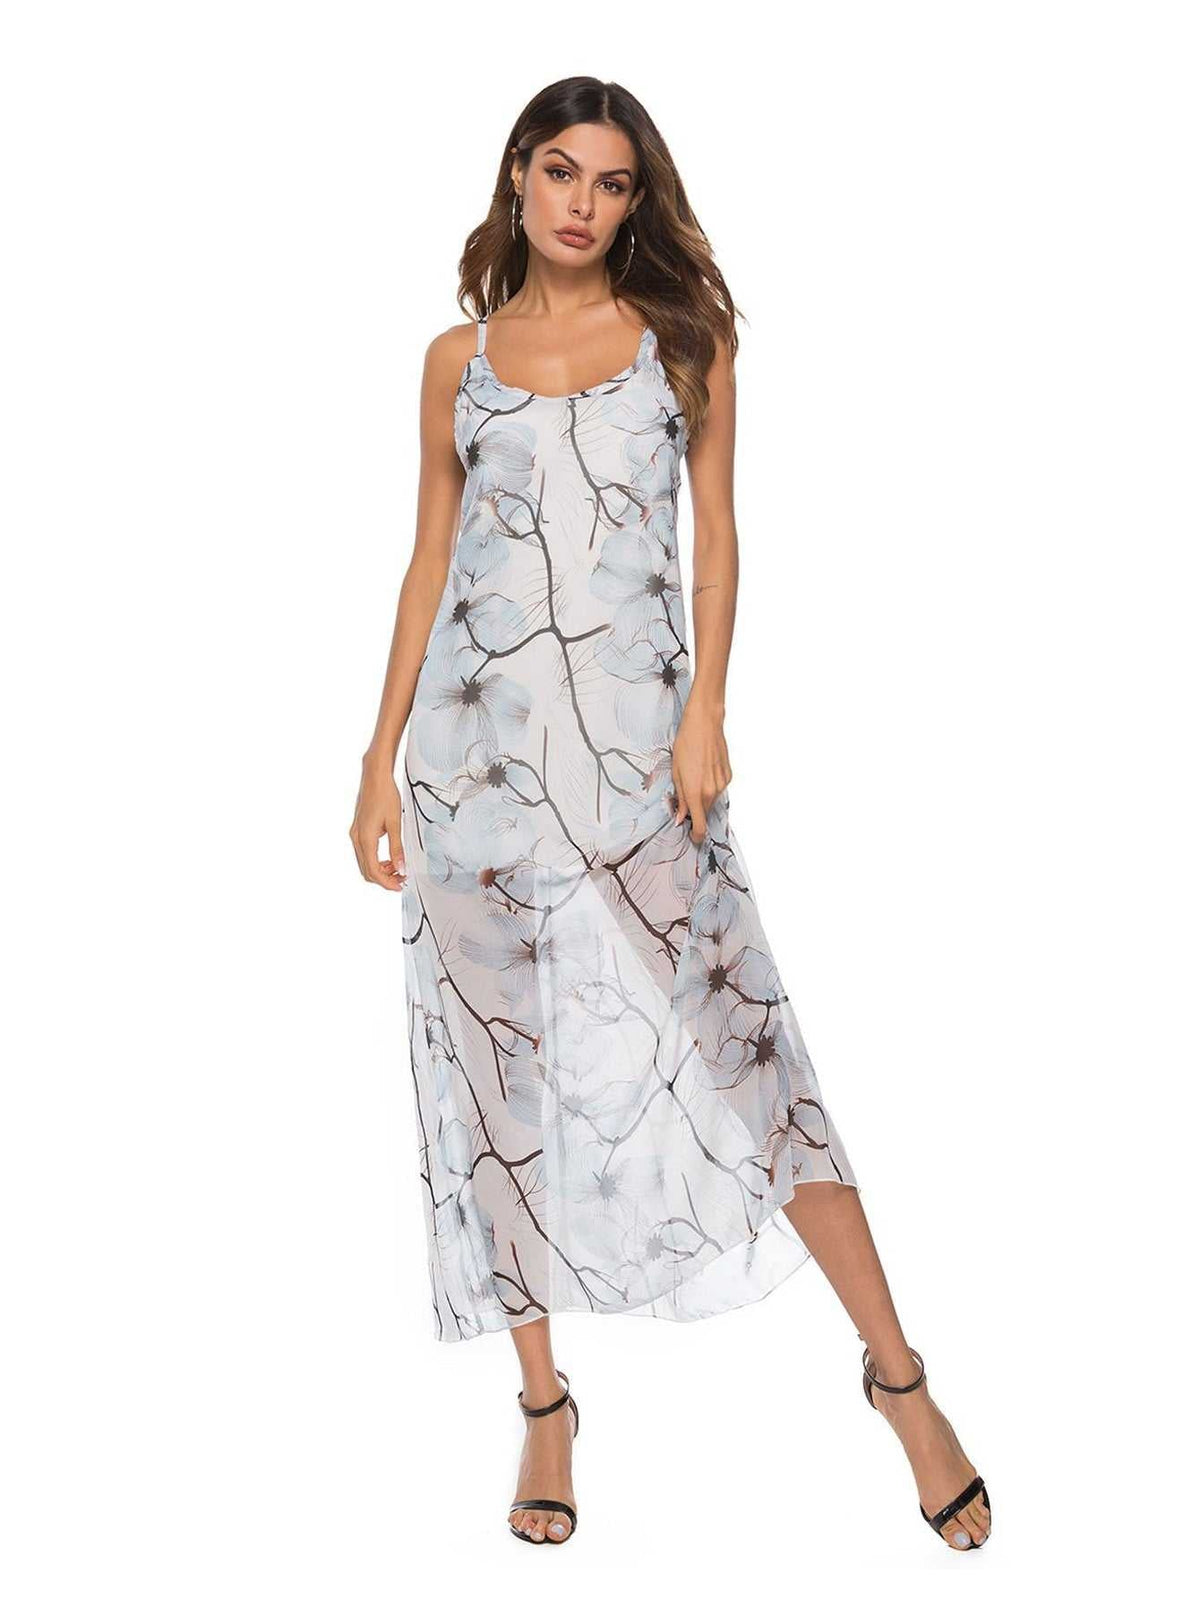 Print Sheer Mesh Maxi Cami Dress With Lining Without Lingerie Sai Feel